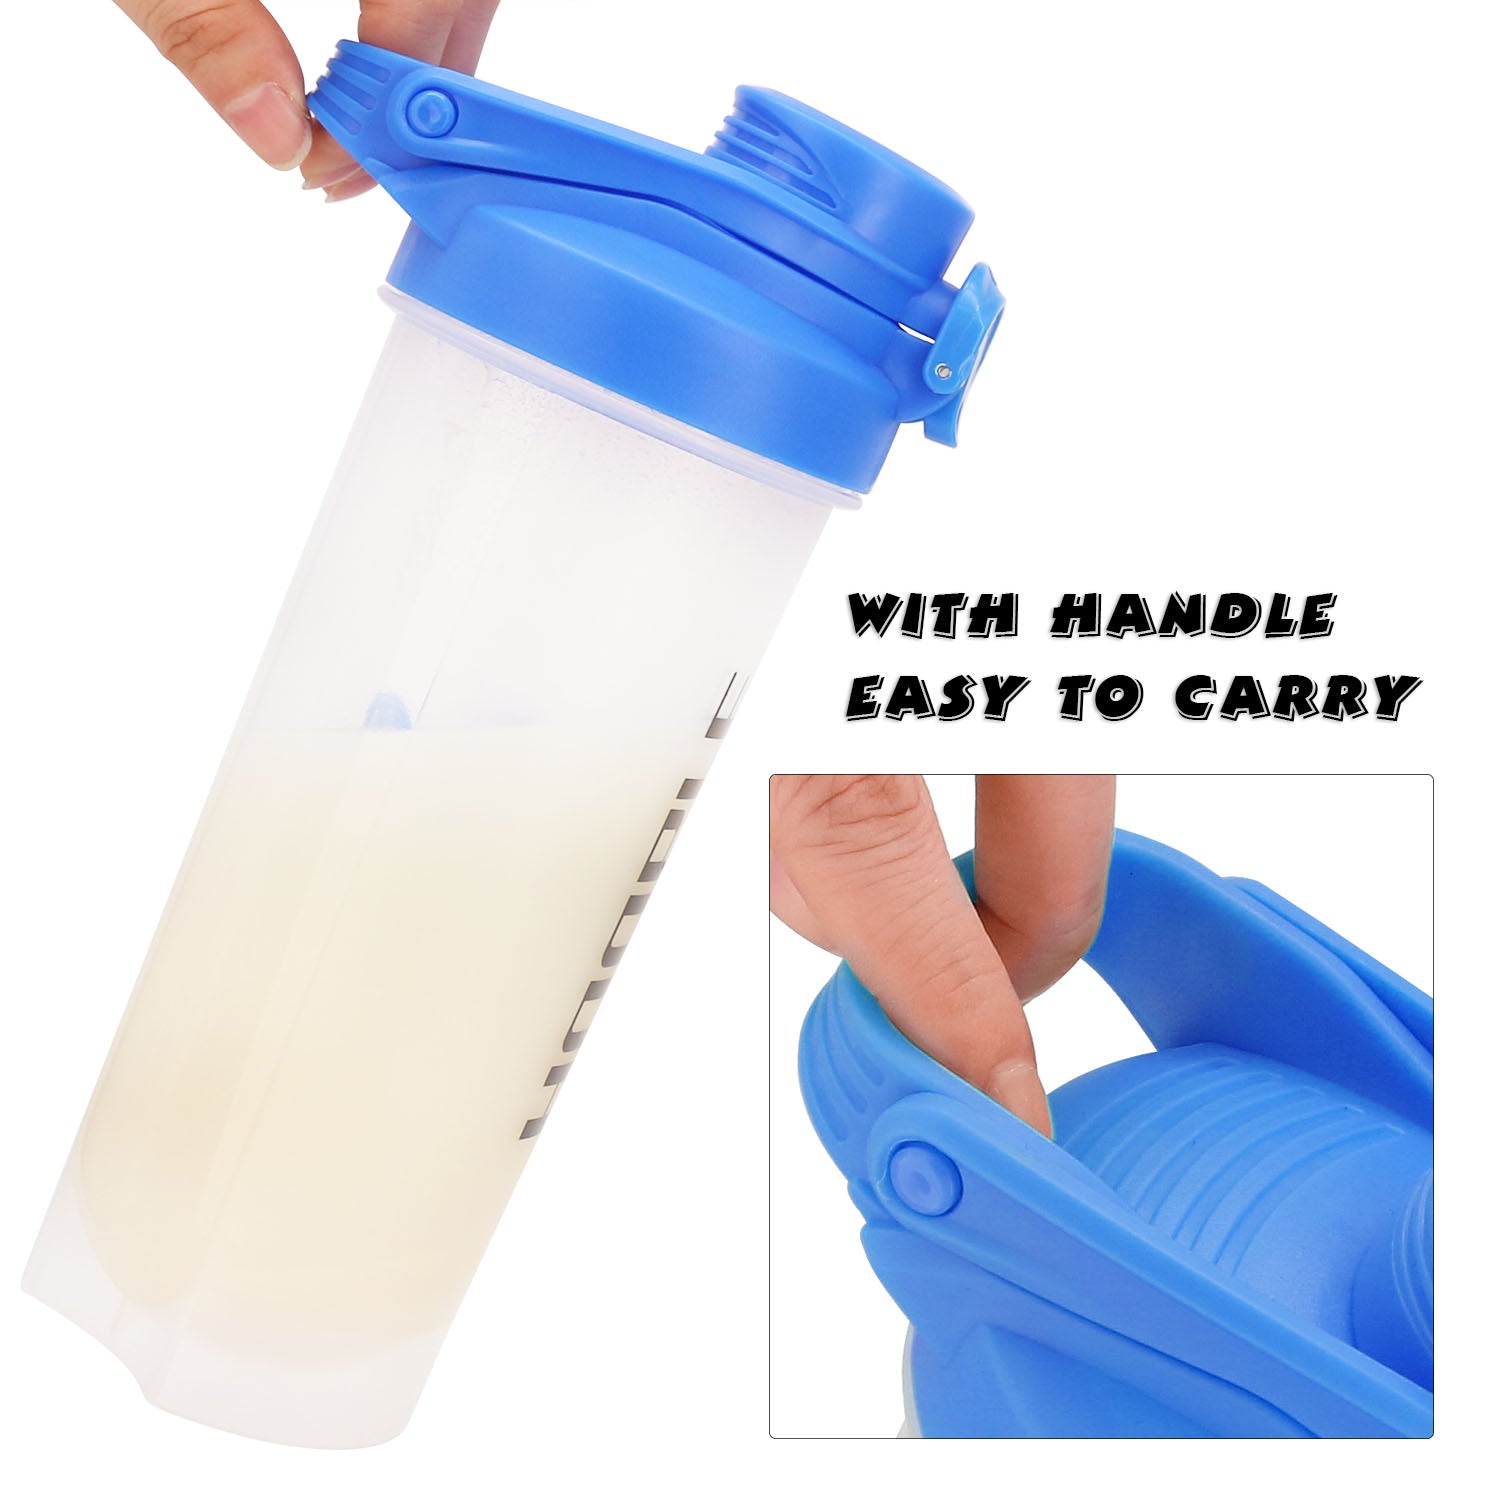 Leak-proof 700ml Shaker Cup with Mixing Ball - Easily Mix